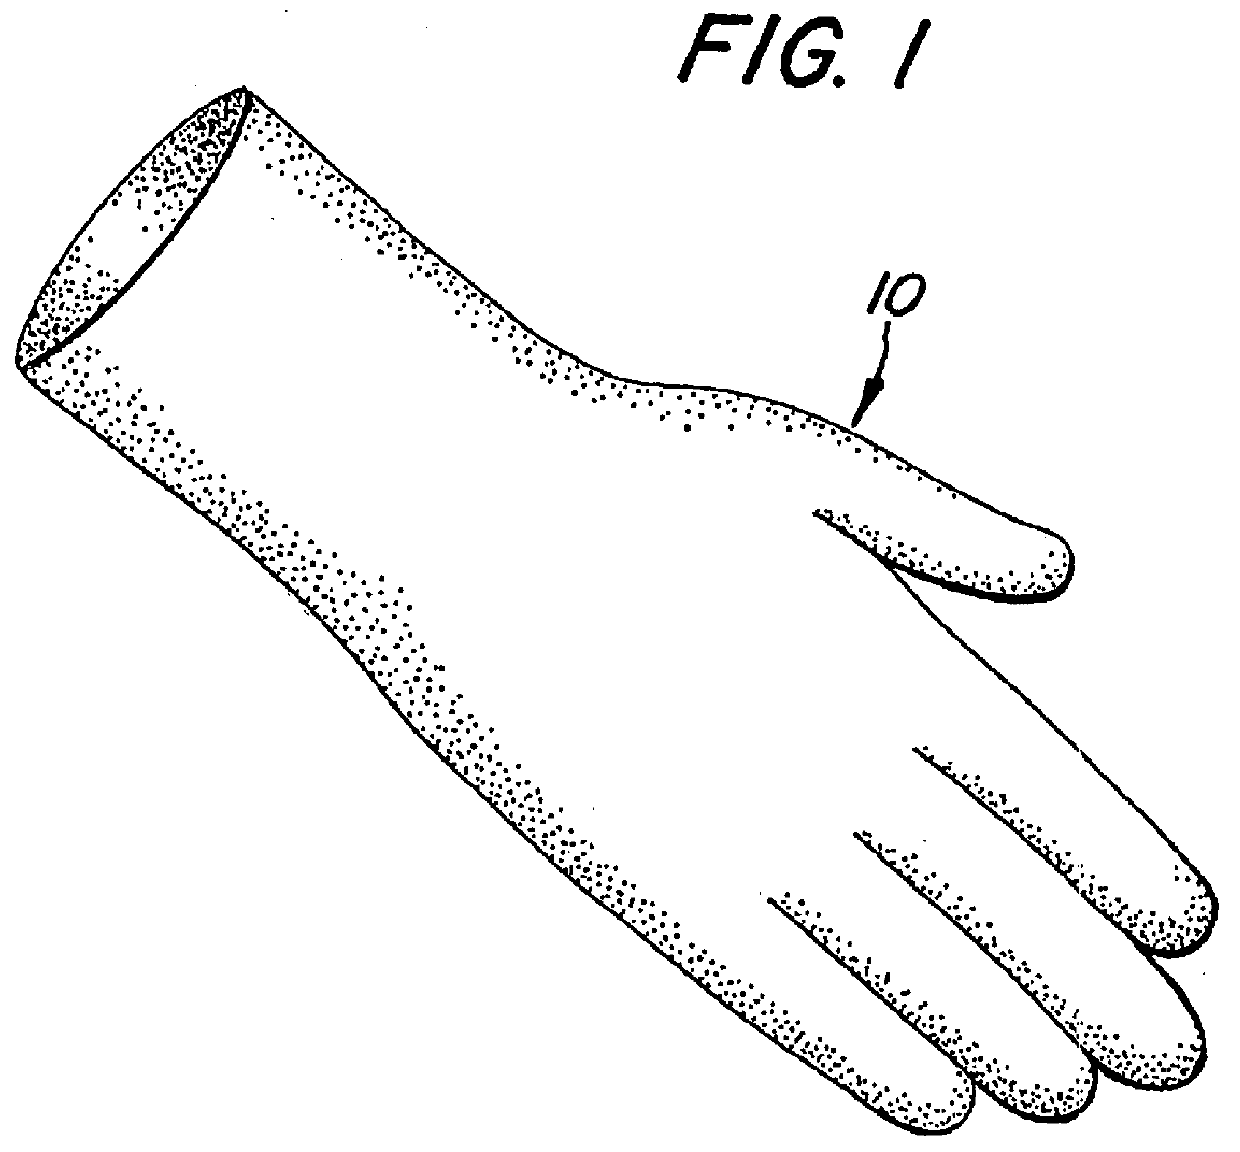 Cut and puncture resistant surgical glove